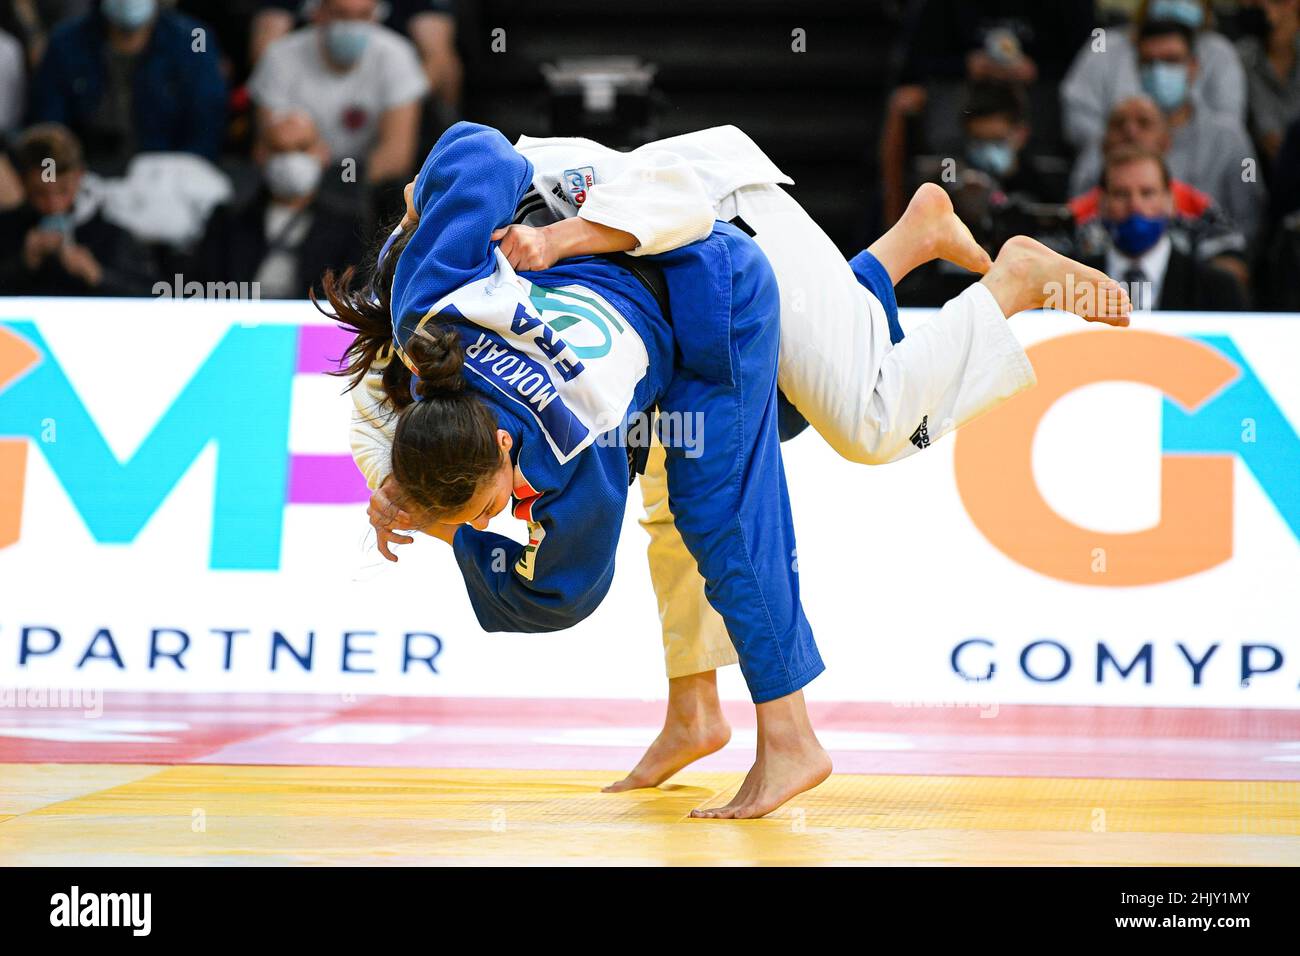 Women -57 kg, Faiza MOKDAR of France competes and tries an uchi mata during the Paris Grand Slam 2021, Judo event on October 16, 2021 at AccorHotels A Stock Photo